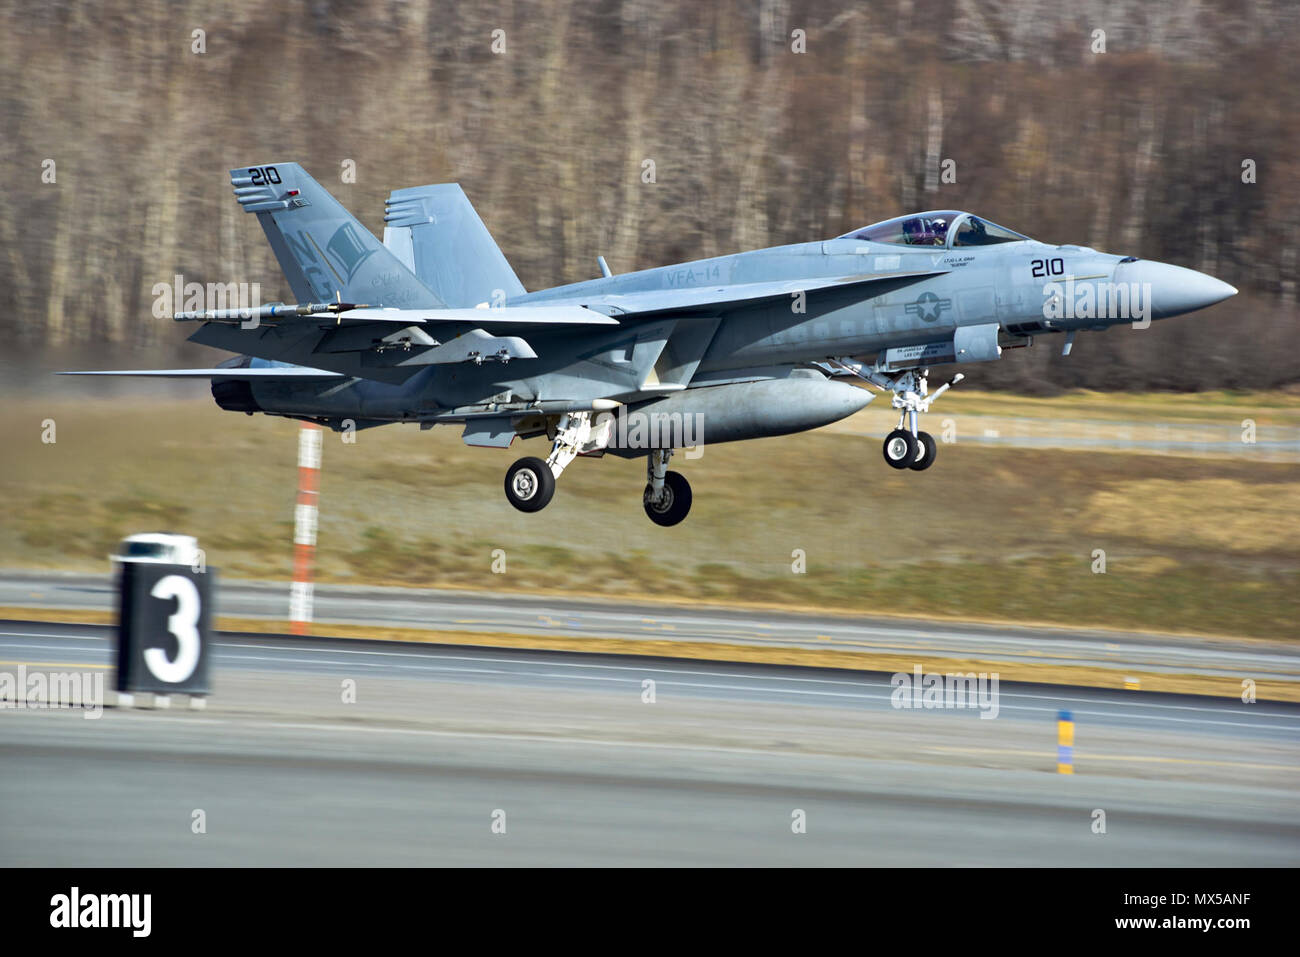 JOINT BASE ELMENDORF-RICHARDSON, Alaska - A U.S. Navy F/A-18E Super Hornet takes off for a training mission May 3, 2017. Northern Edge 2017 is Alaska's premiere joint training exercise designed to practice operations, techniques, and procedures as well as enhance interoperability among the services. Thousands of participants from all the services; Airmen, Soldiers, Sailors, Marines, and Coast Guard personnel from active duty, Reserve and National Guard units, are involved. Stock Photo